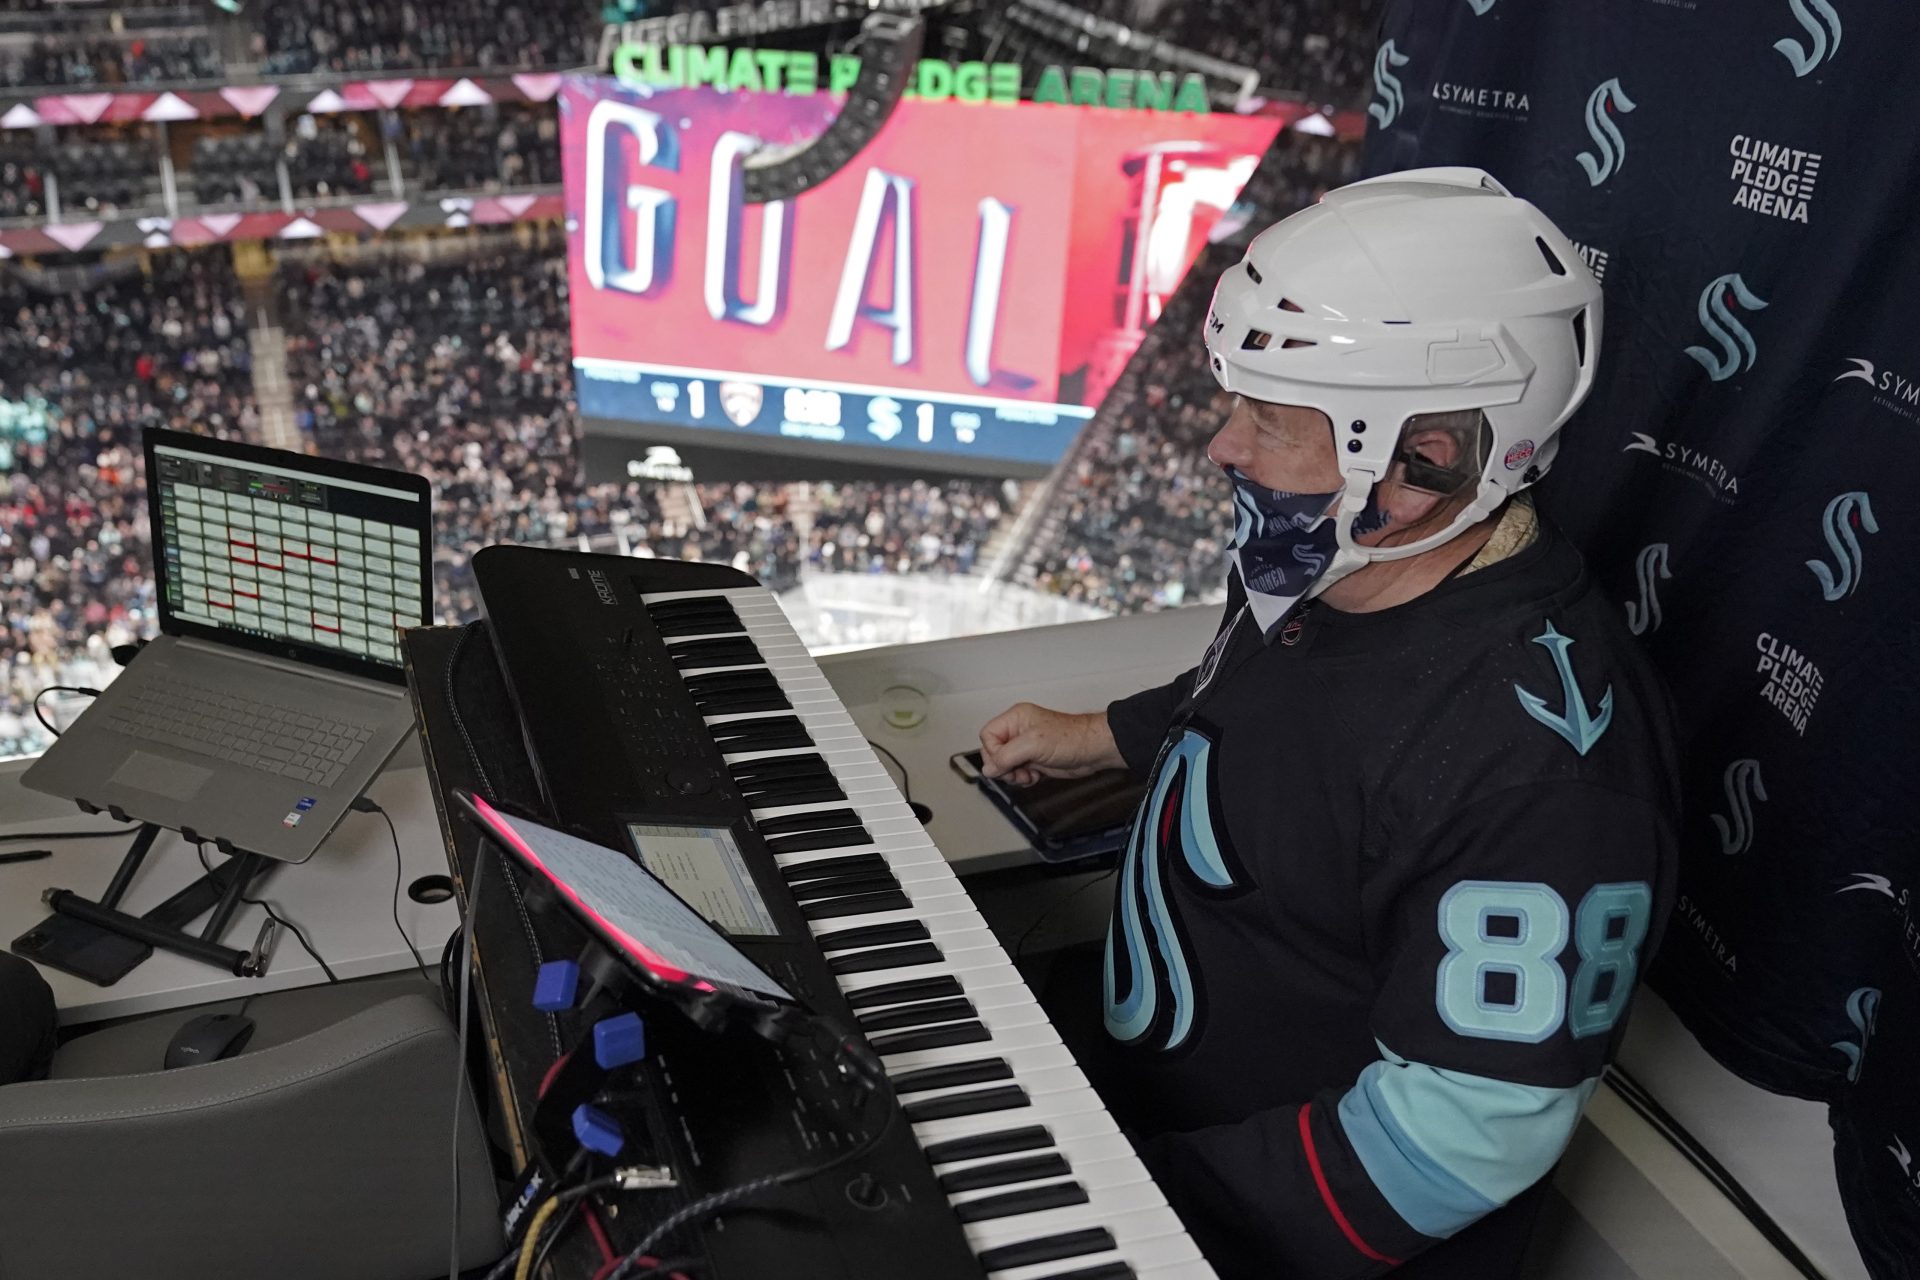 Seattle Kraken organist Rod Masters performs after a goal was scored during an NHL hockey game against the Florida Panthers at Climate Pledge Arena, on Jan. 23, 2022, in Seattle.